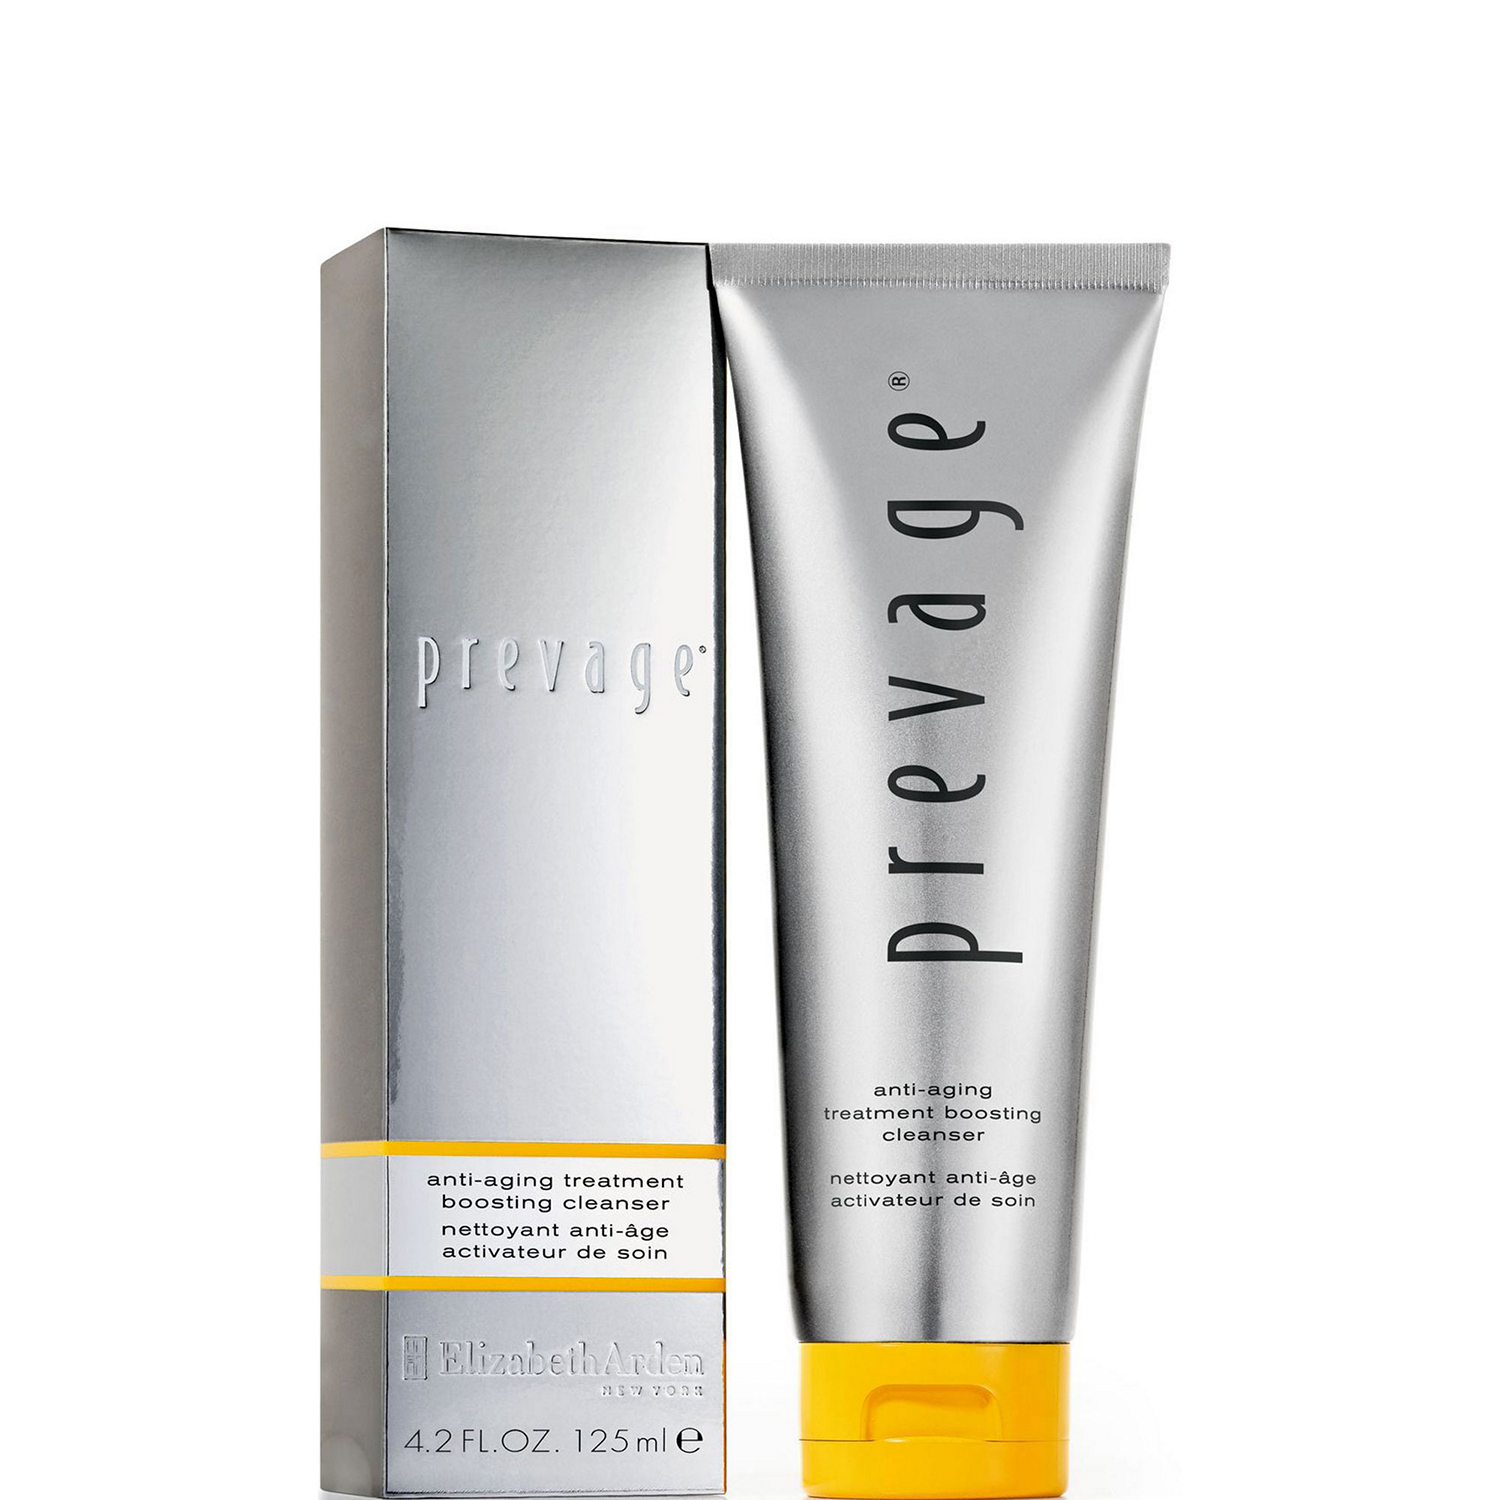 Prevage Anti-Aging Treatment Boosting Cleanser